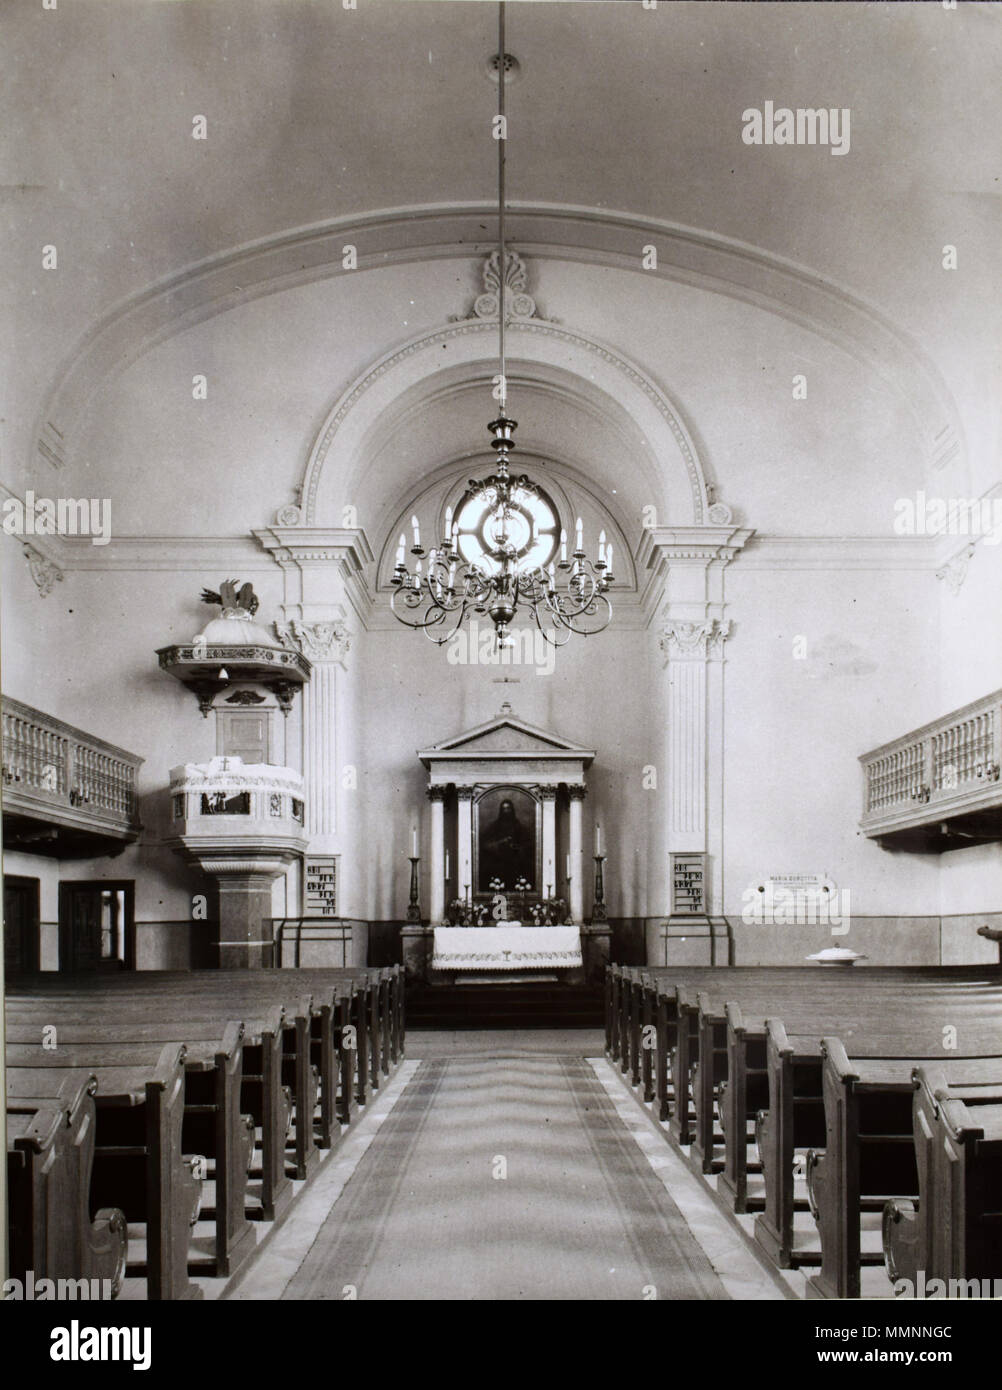 . English: The interior of the Lutheran Church in Buda Castle that was destroyed in World War 2. Archive image photographed by me on an exhibition.  . 28 July 2017, 18:48:34. Zello Buda lutheran old Stock Photo